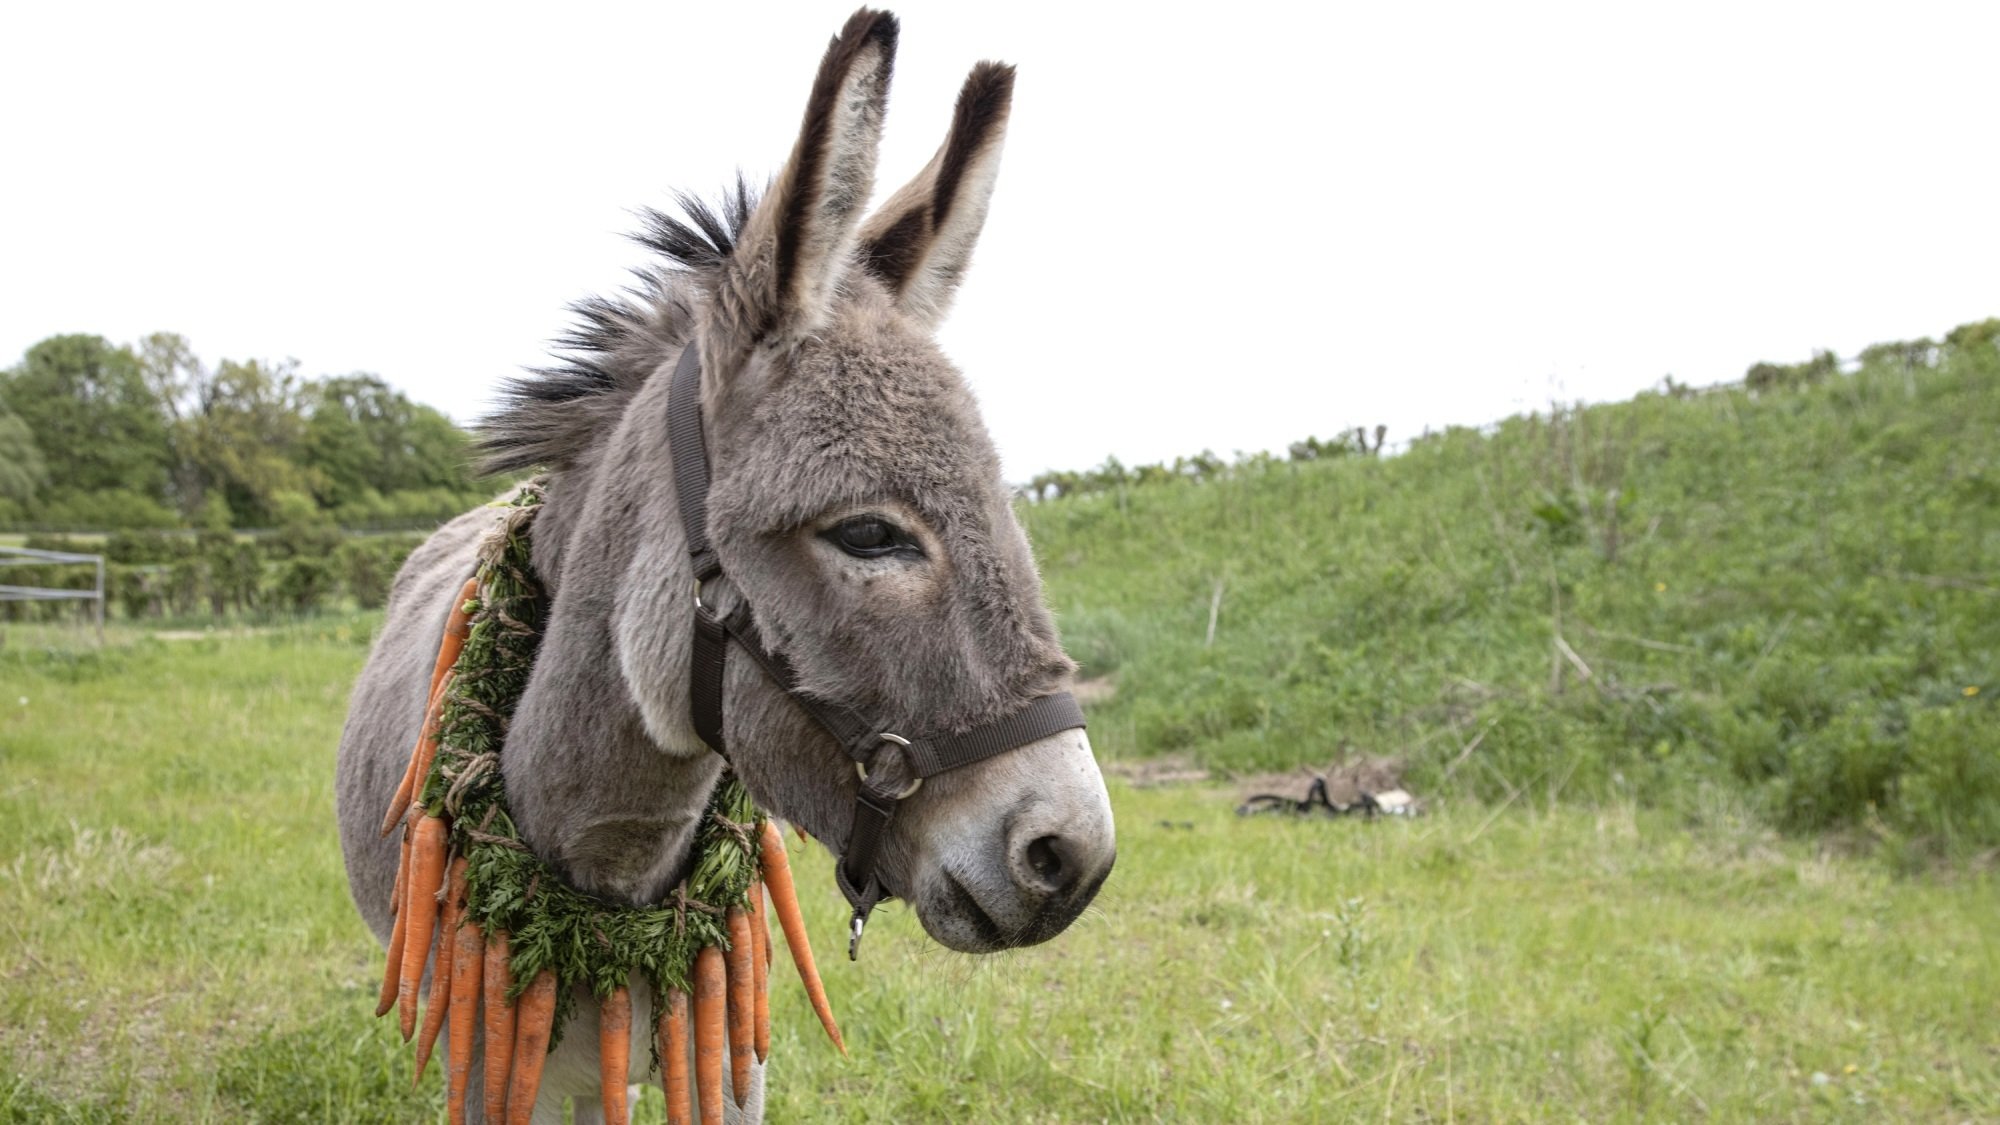 A donkey stands in a field with a wreath of carrots around its neck.